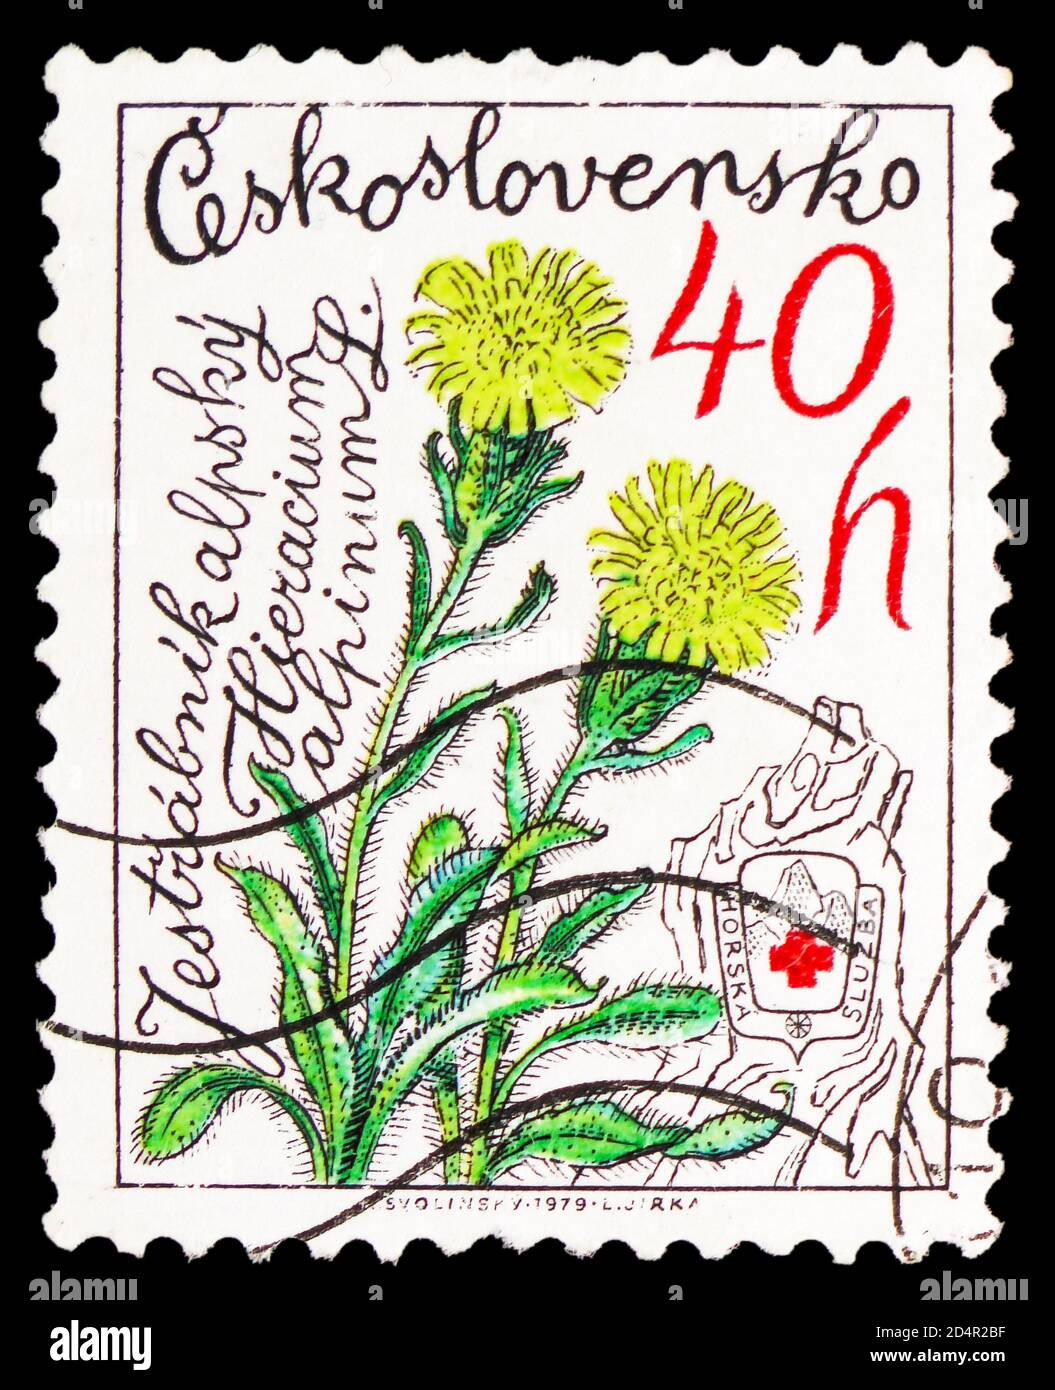 MOSCOW, RUSSIA - SEPTEMBER 28, 2020: Postage stamp printed in Czechoslovakia shows Alpine Hawkweed (Hieracium alpinum), Nature protection serie, circa Stock Photo